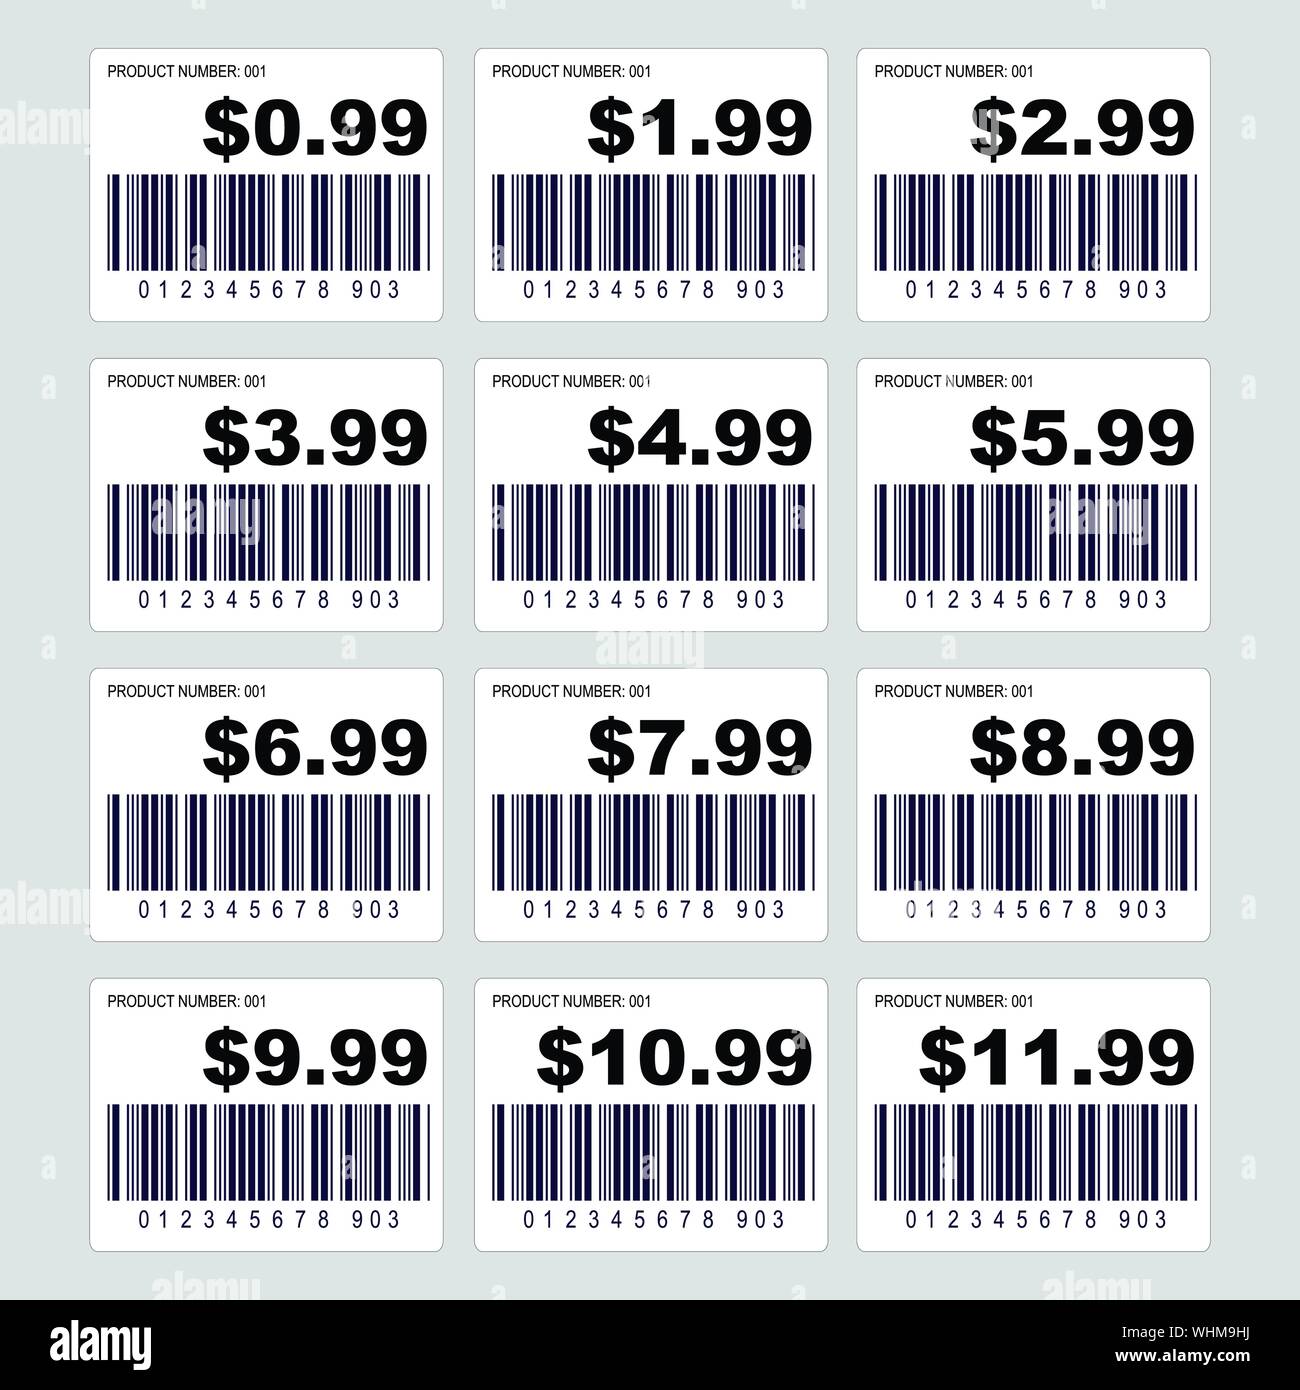 Price tag barcode label set Stock Vector